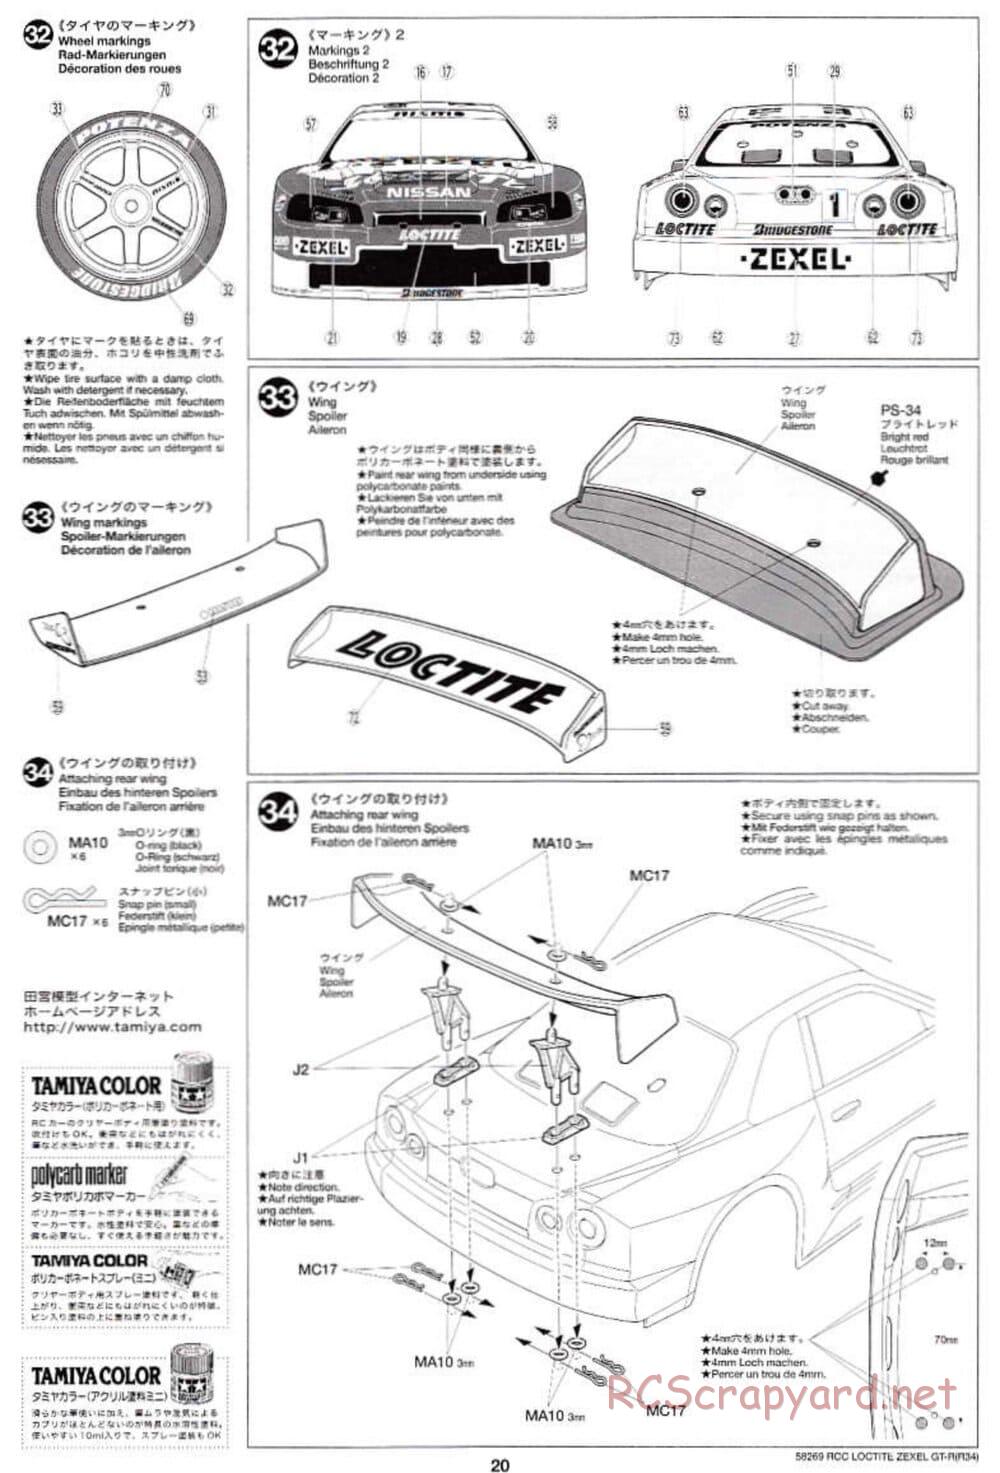 Tamiya - Loctite Zexel Skyline GT-R (R34) - TA-04 Chassis - Manual - Page 20